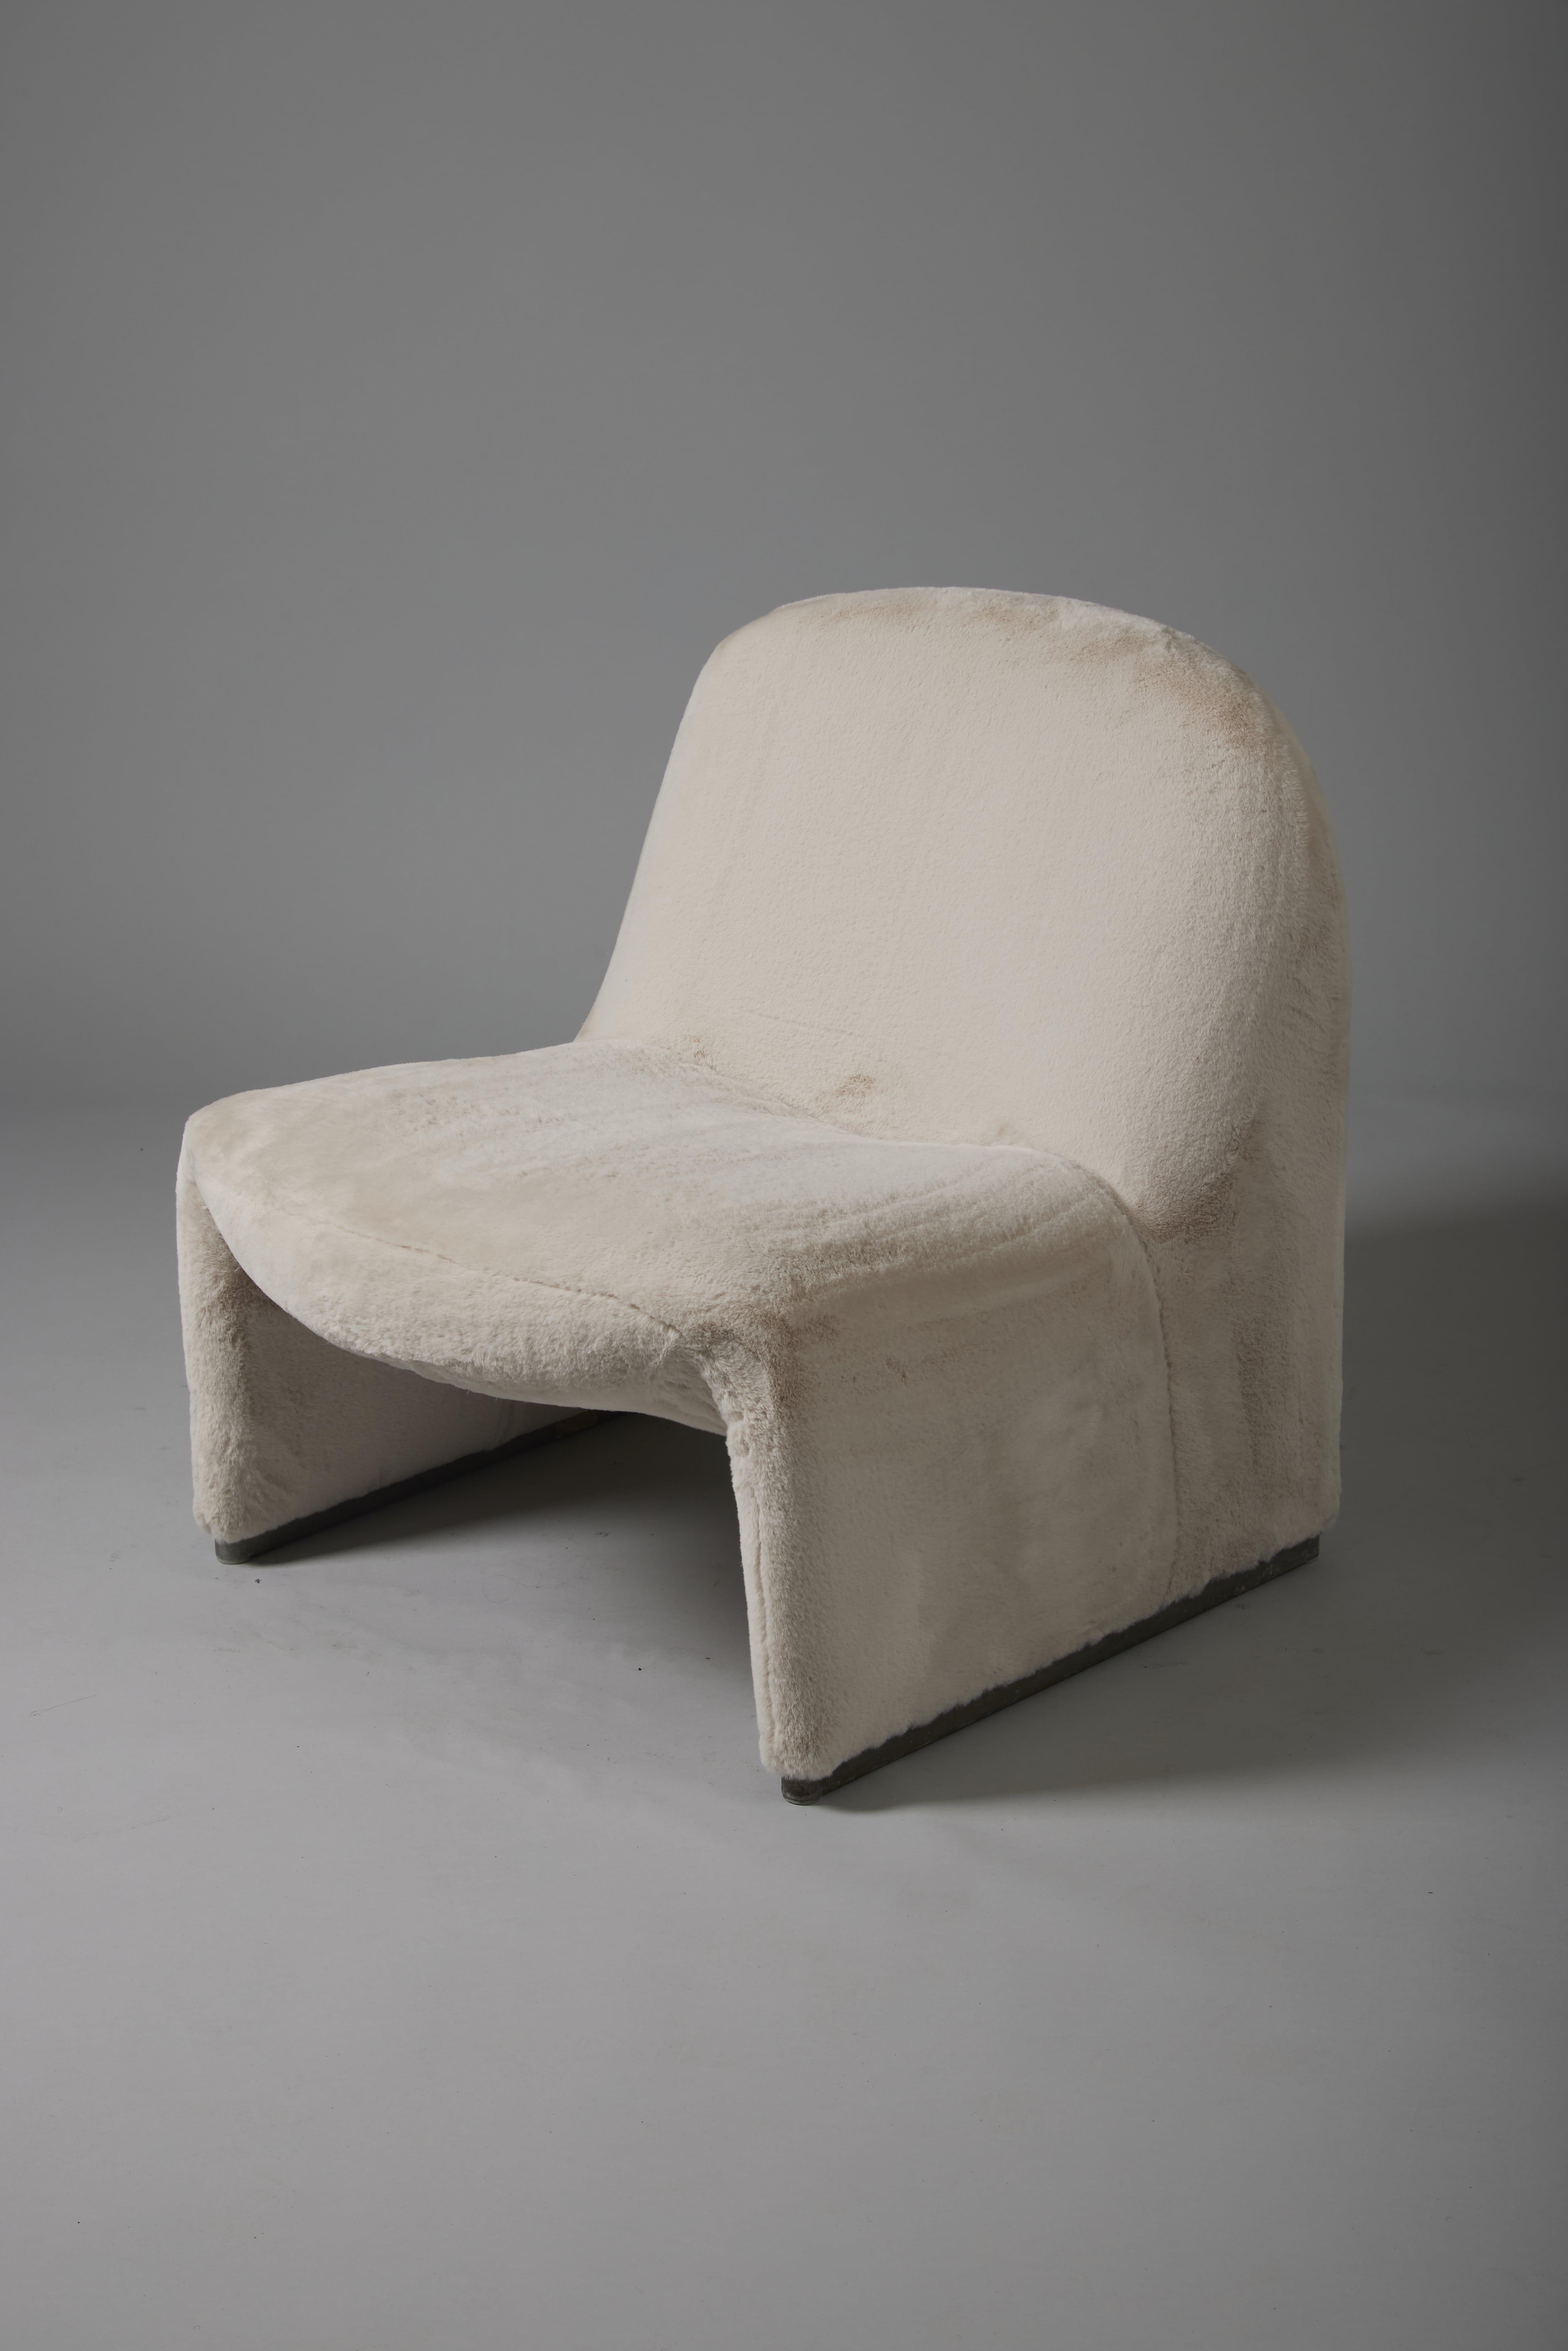 Alky armchair by Italian designer Giancarlo Piretti for Artifort, 1970s. The structure is covered with thermoformed foam, and the base is made of aluminum. Good condition. This armchair has been reupholstered with a high-end bouclé fabric in shades